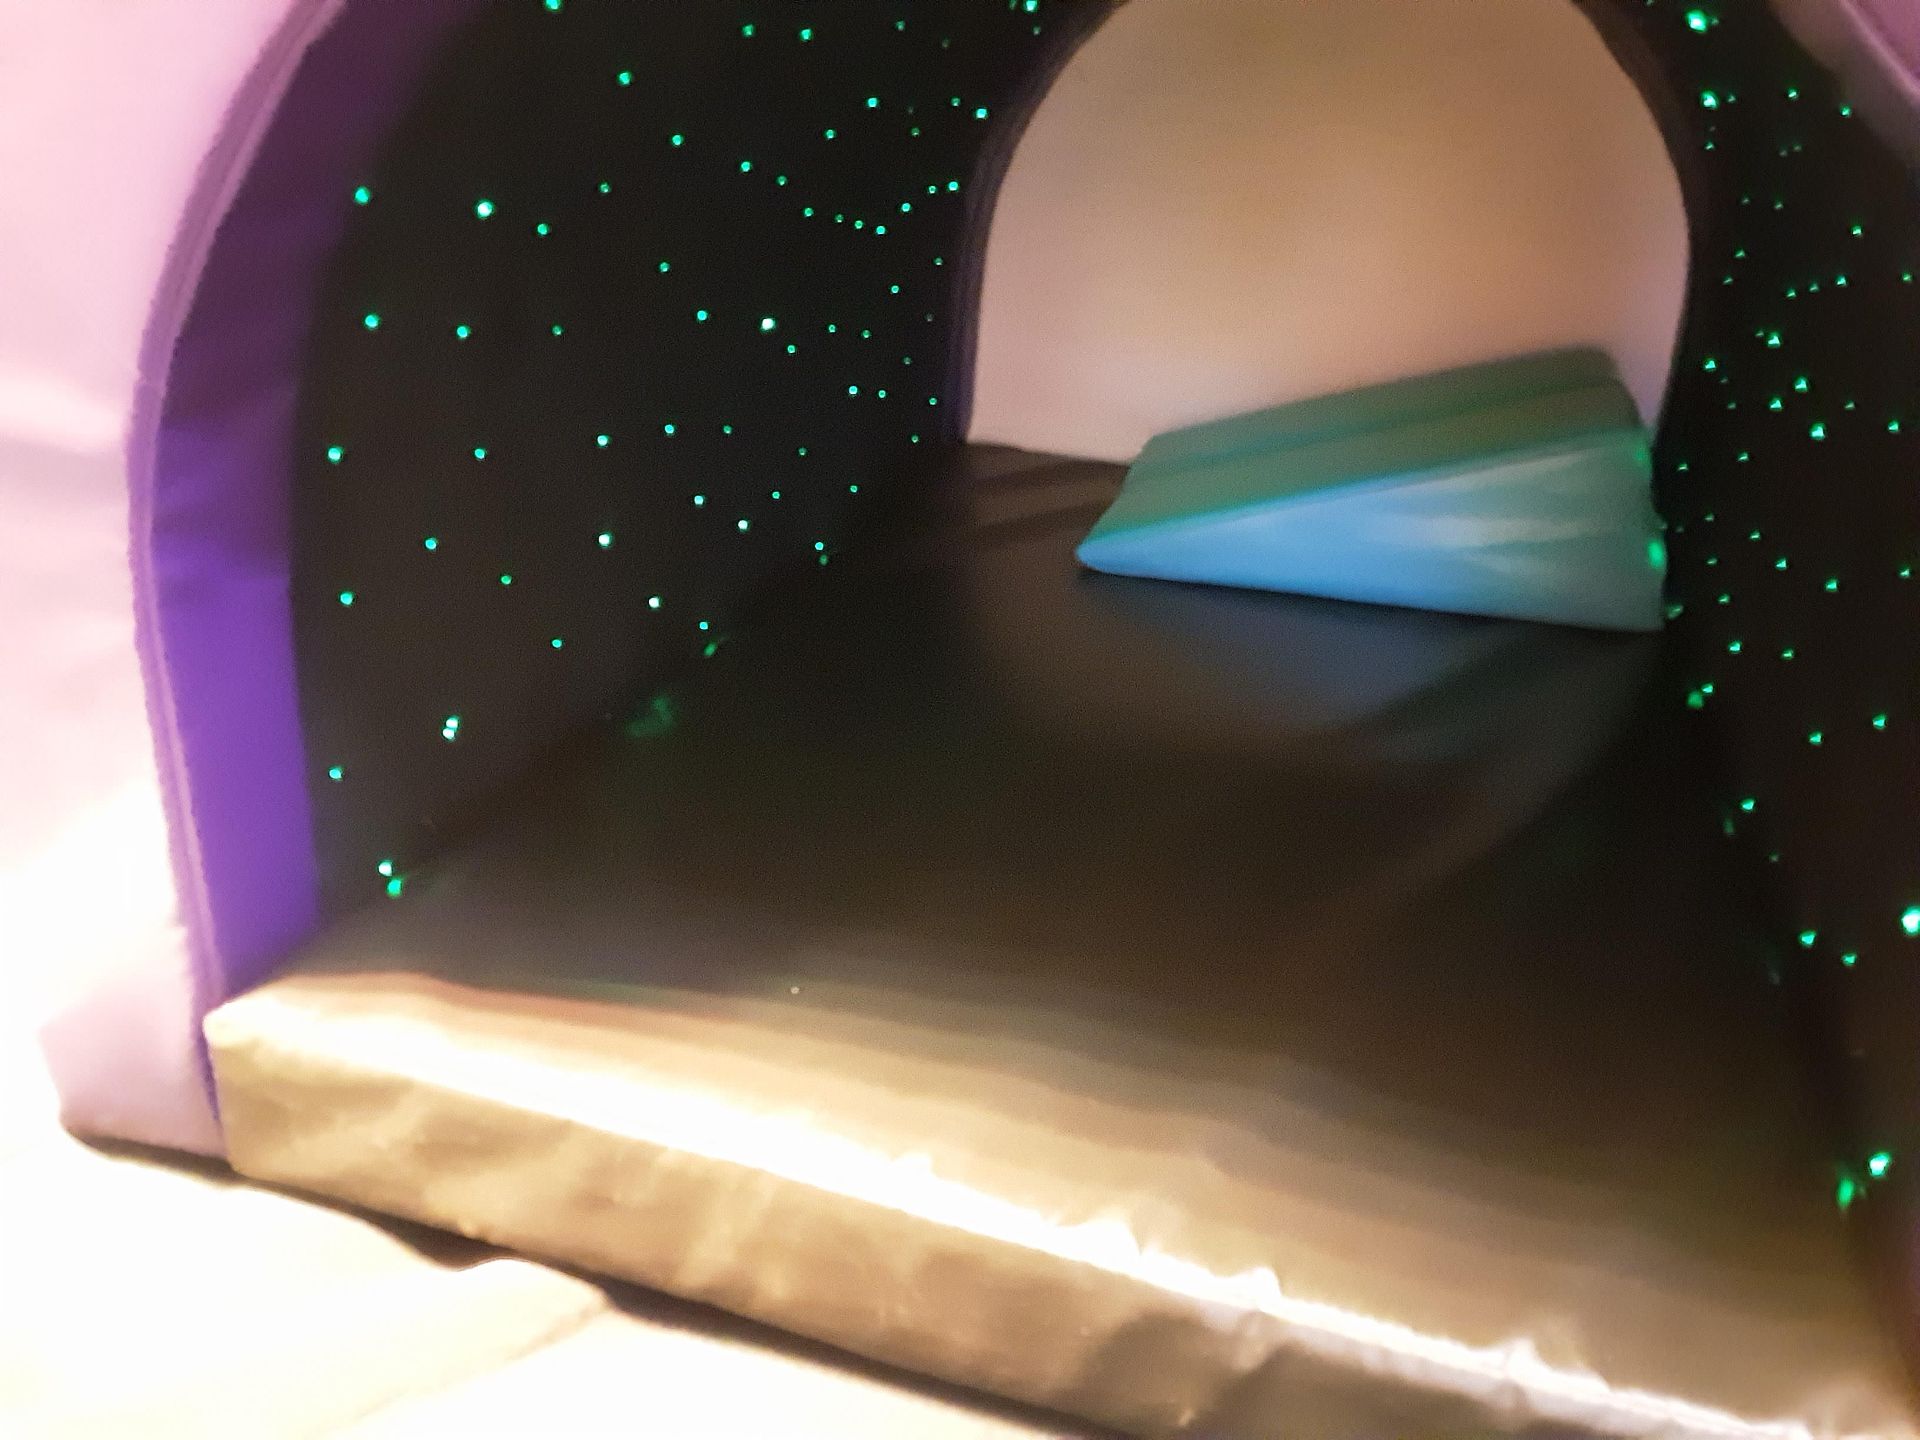 Contents of Sensory Room To Include SpaceKraft Light & Sound Therapy Station with Cushions, Lights & - Image 8 of 18